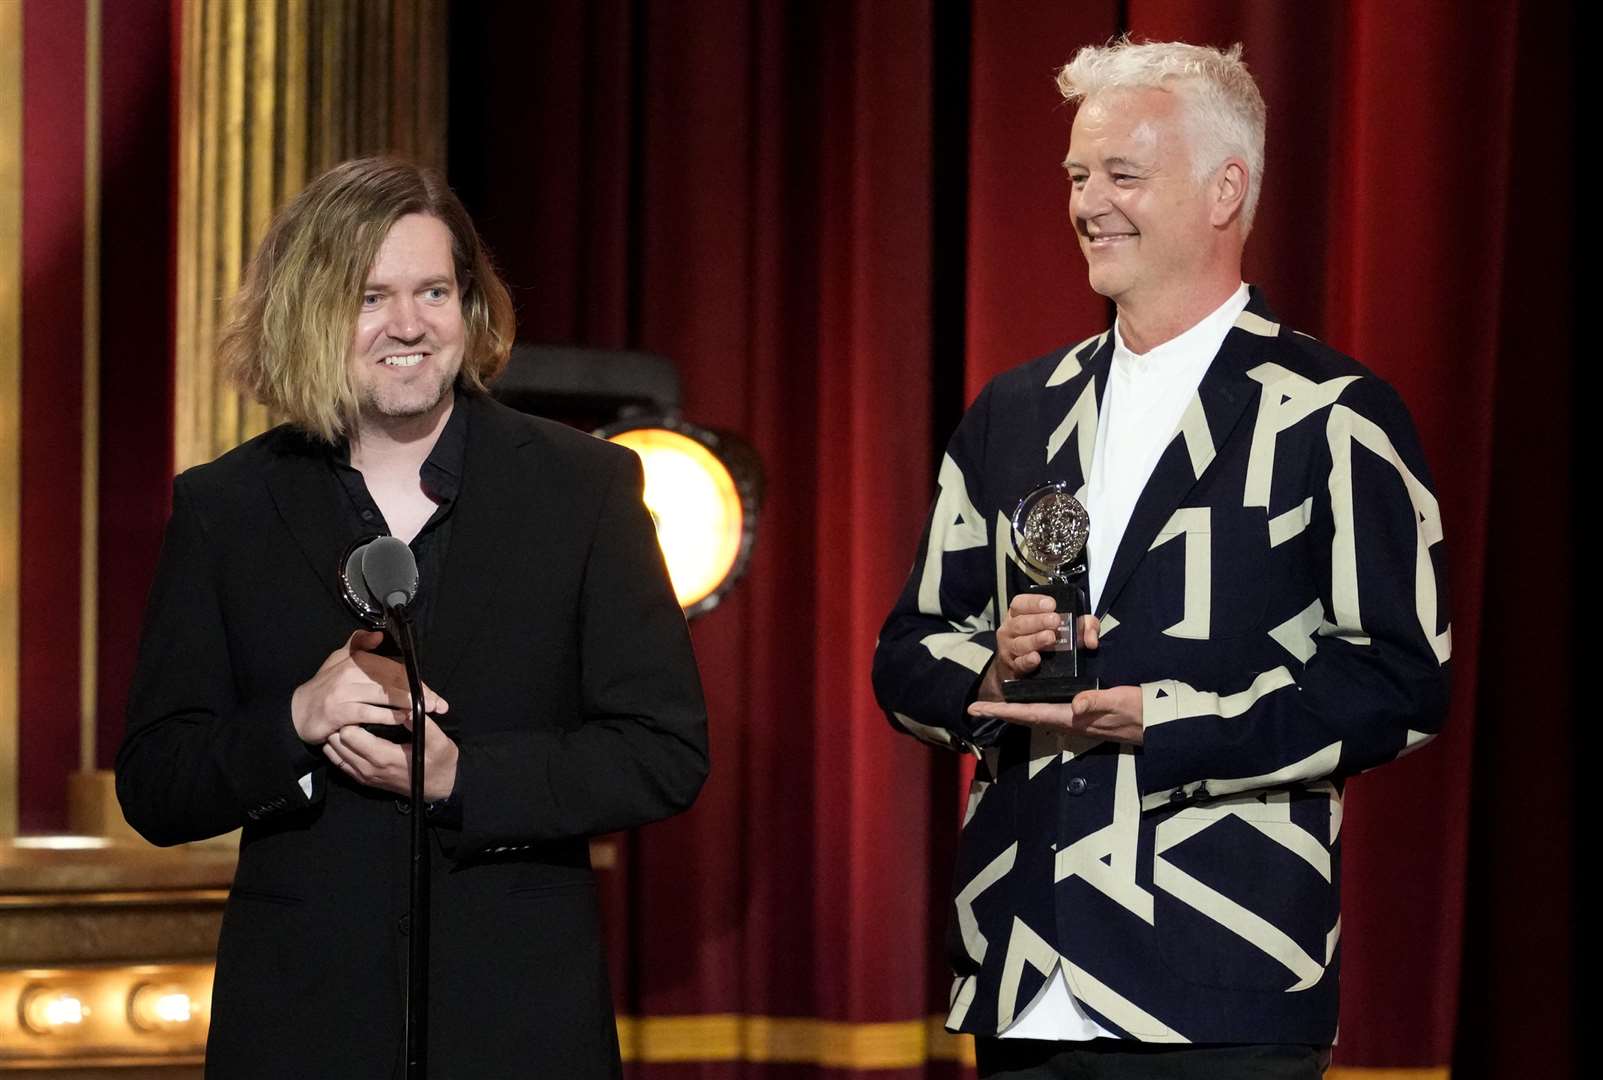 Andrzej Goulding, left, and Tim Hatley accept the award for best scenic design of a play for Life Of Pi at the 76th annual Tony Awards (Charles Sykes/Invision/AP)